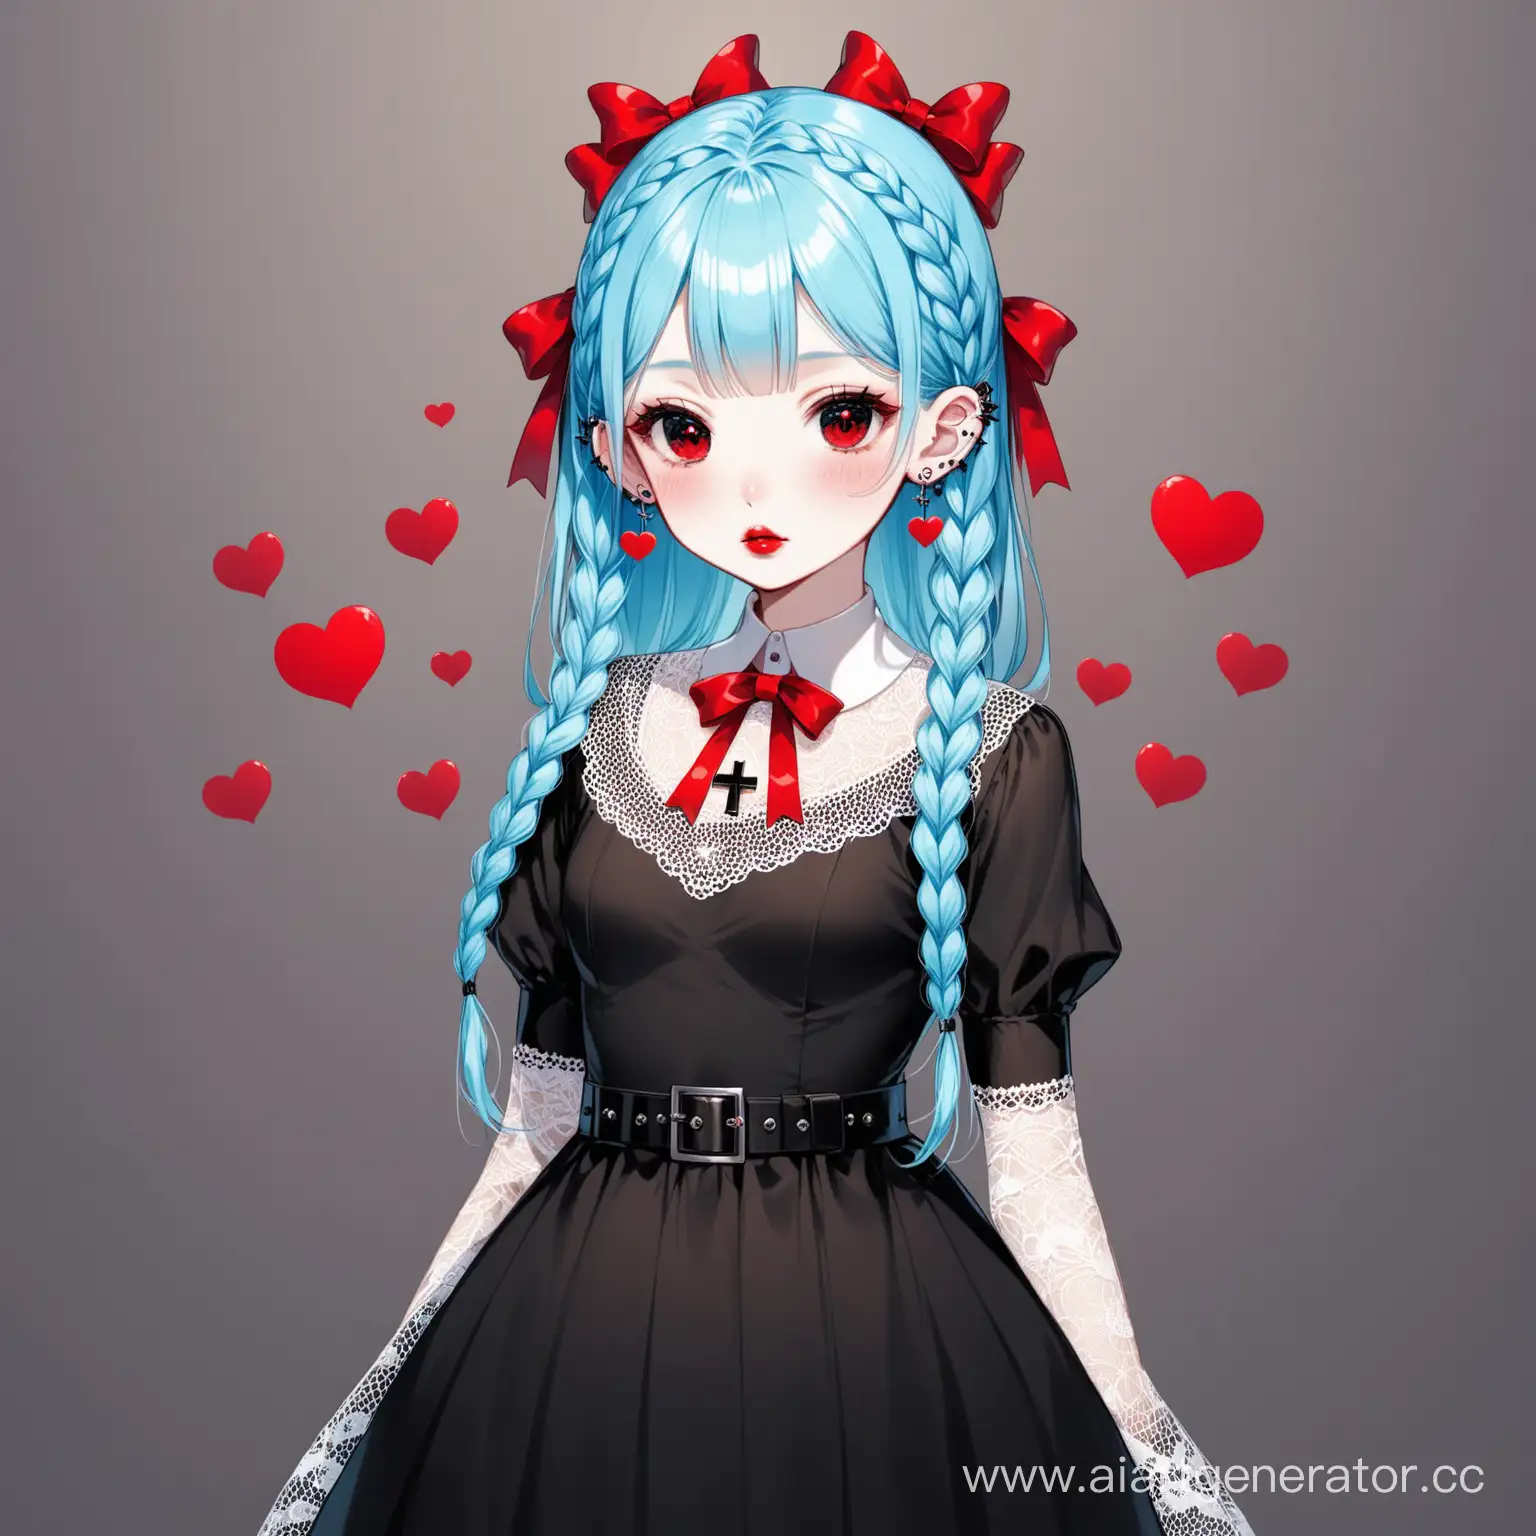 Adorable-Girl-with-Light-Blue-Braids-and-Red-Bow-Accents-in-Black-Dress